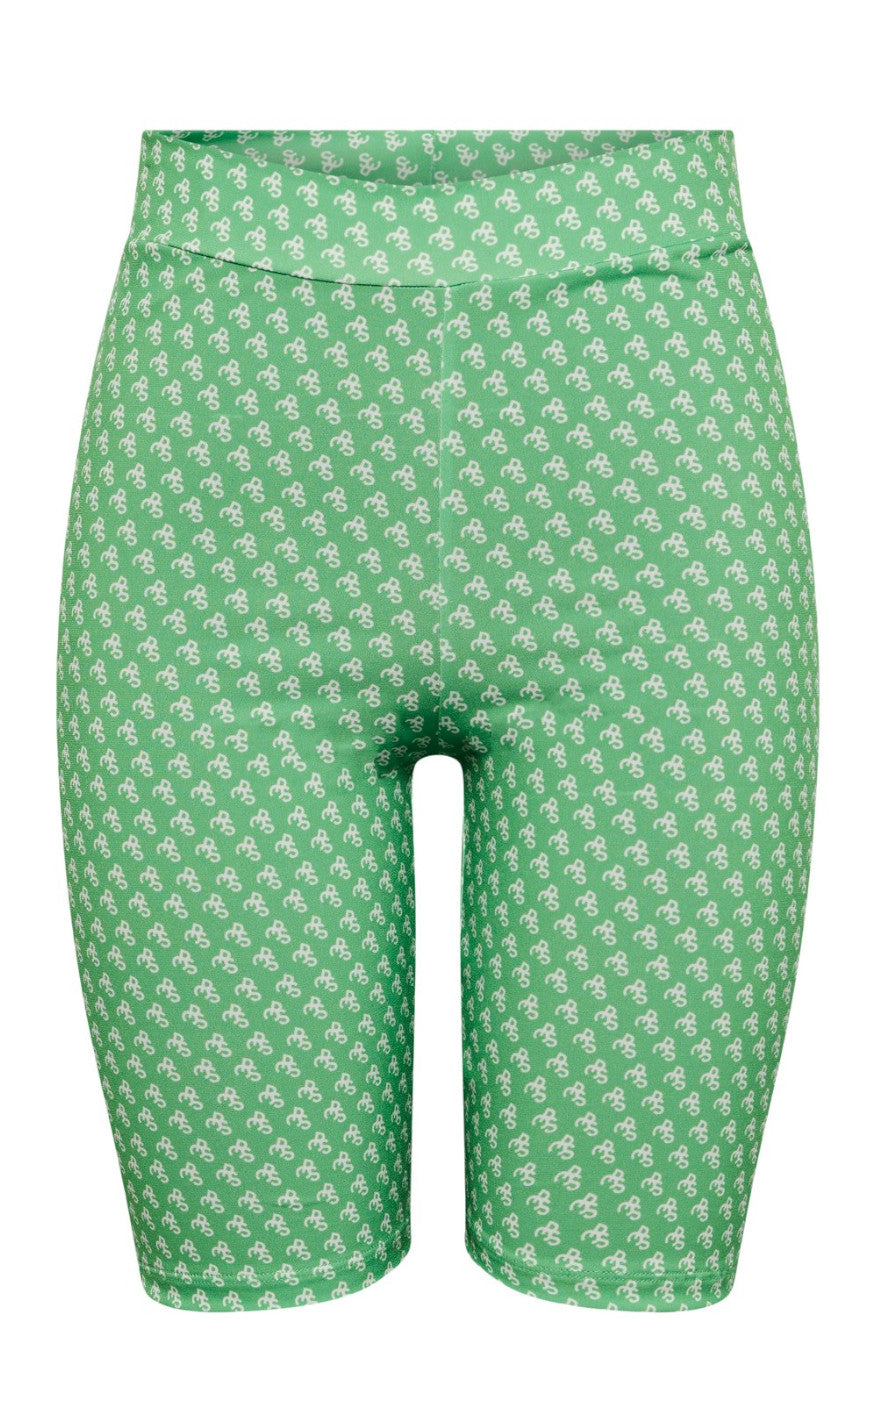 13: PIECES Shorts - Ammi - Poison Green